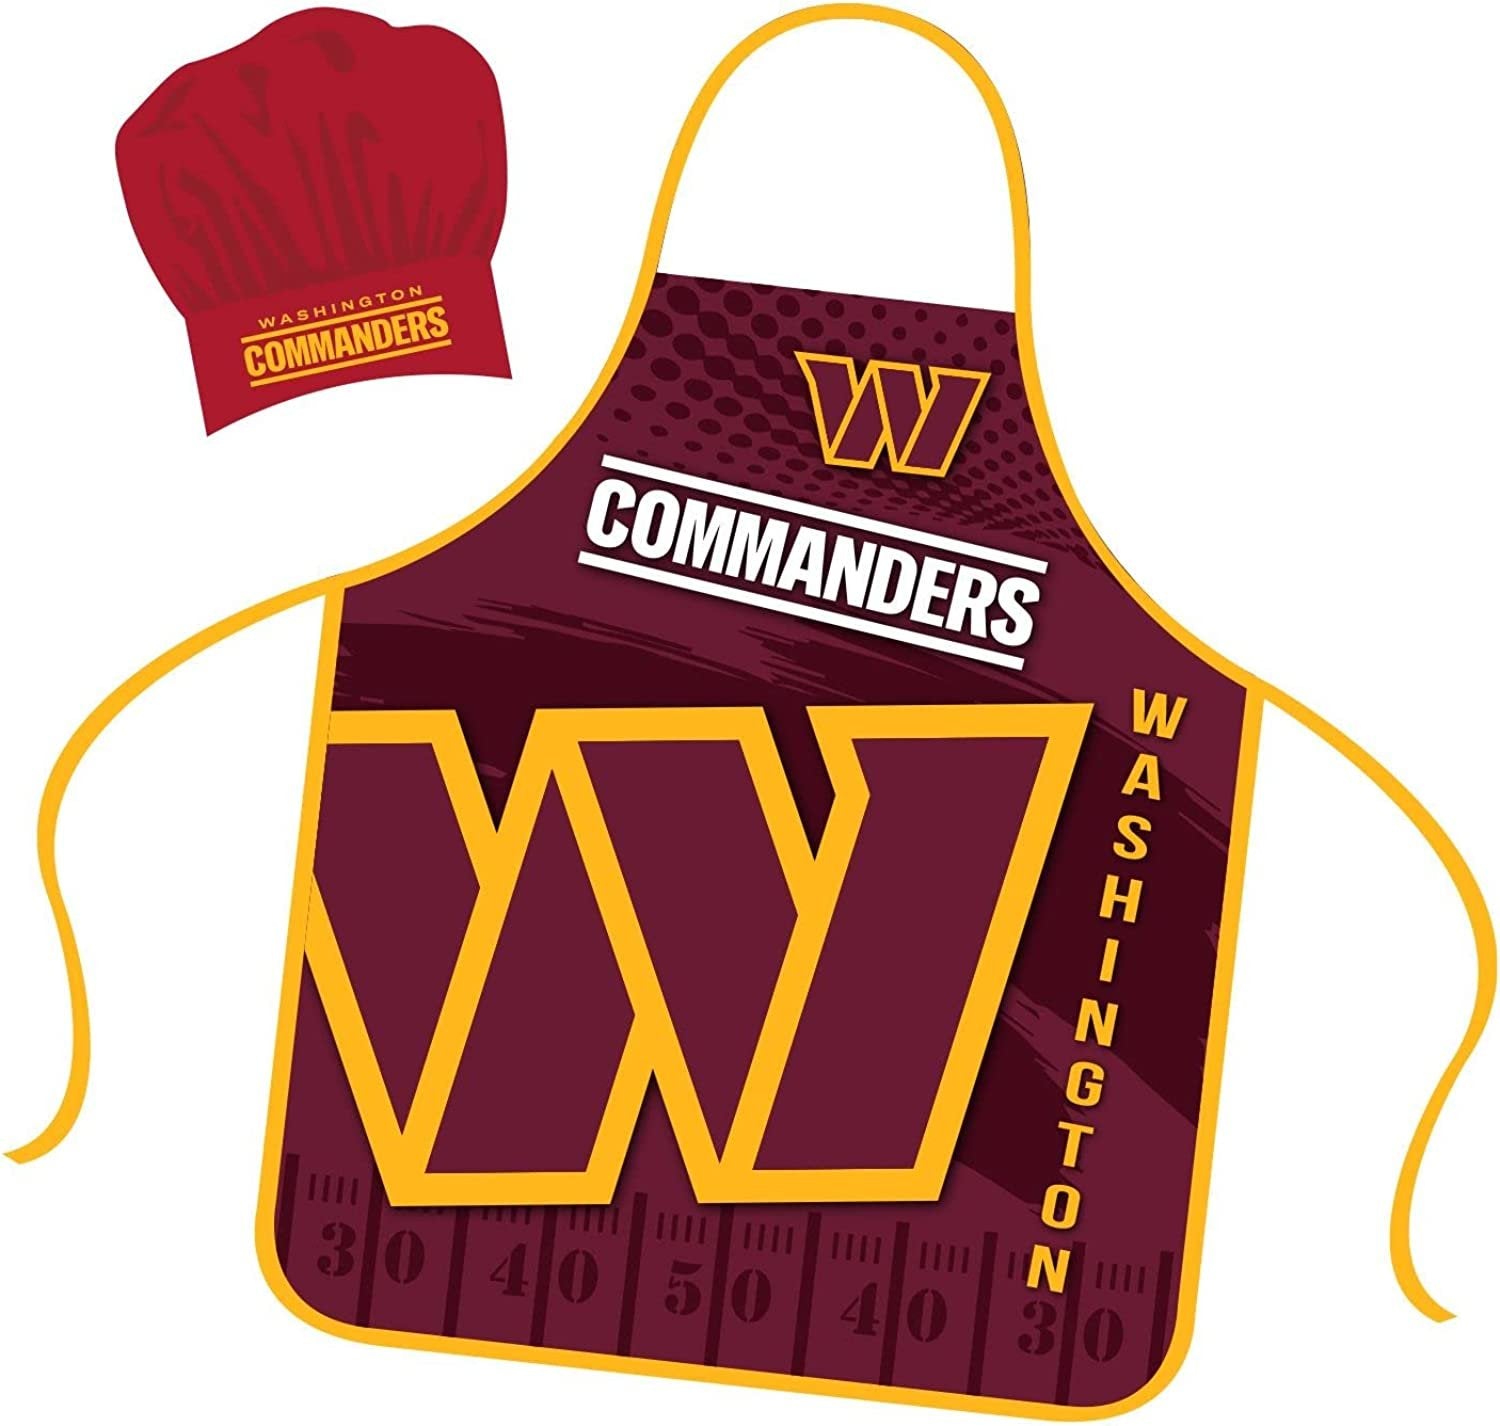 Washington Commanders Apron Chef Hat Set Full Color Universal Size Tie Back Grilling Tailgate BBQ Cooking Host